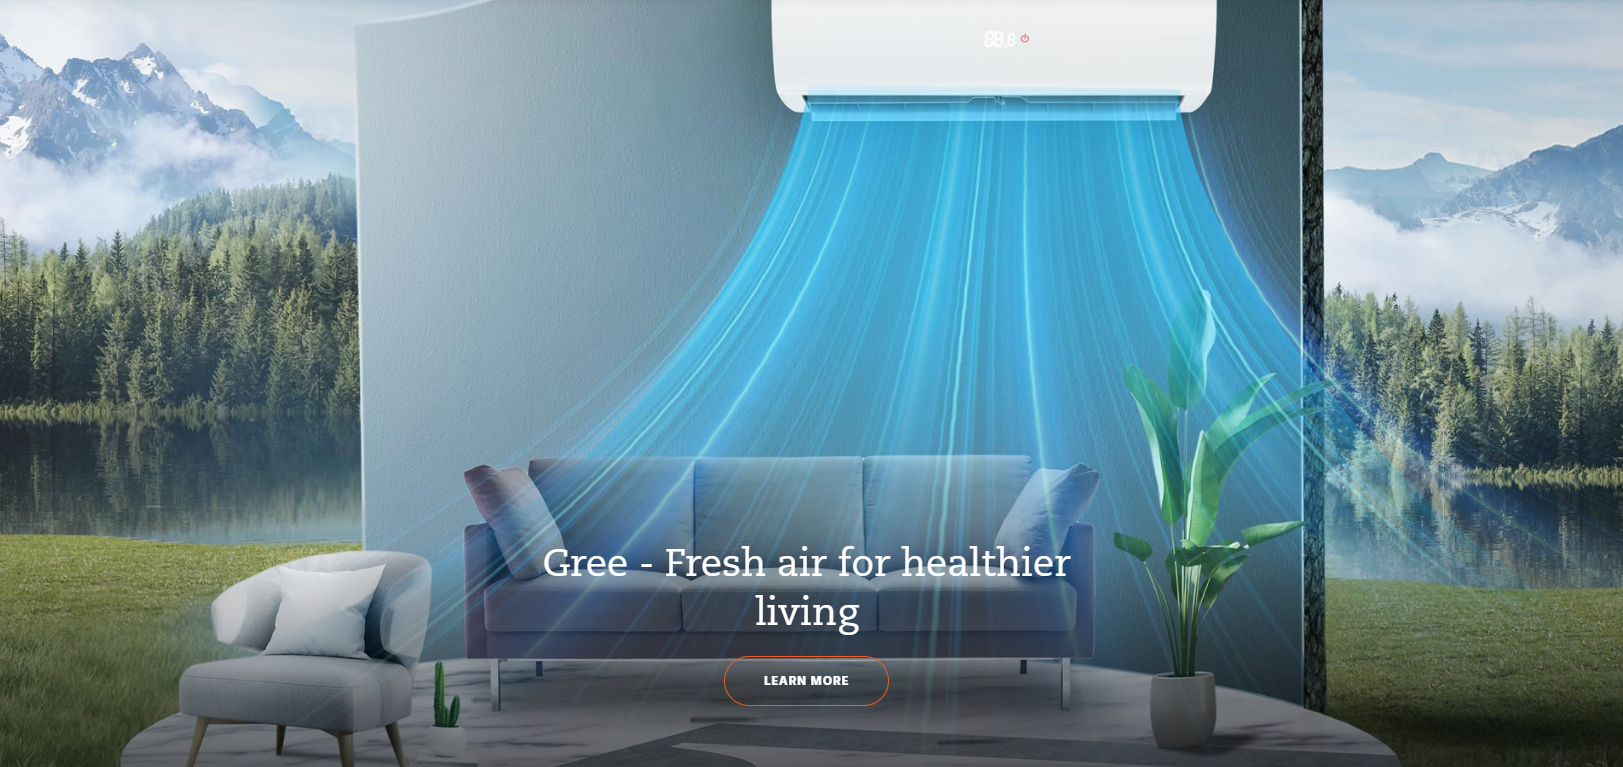 GREE air conditioners